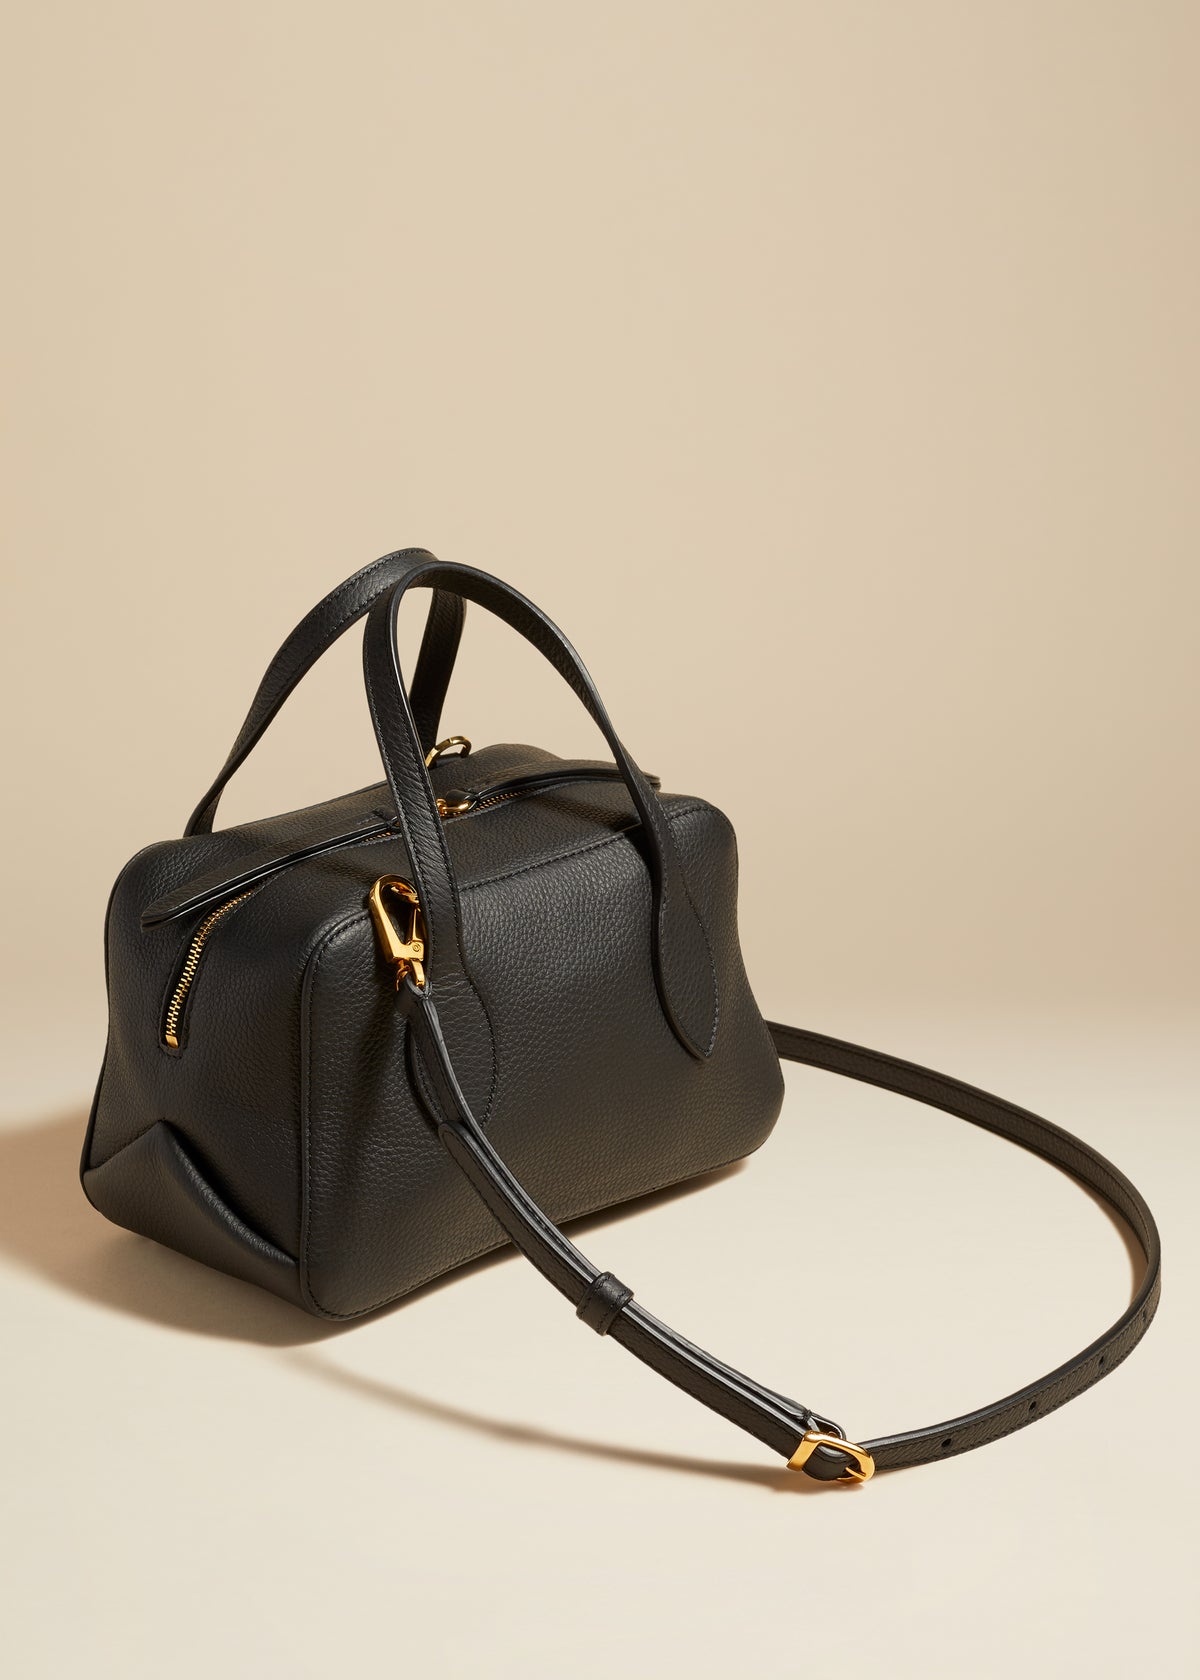 The Small Maeve Crossbody Bag in Black Pebbled Leather - 2